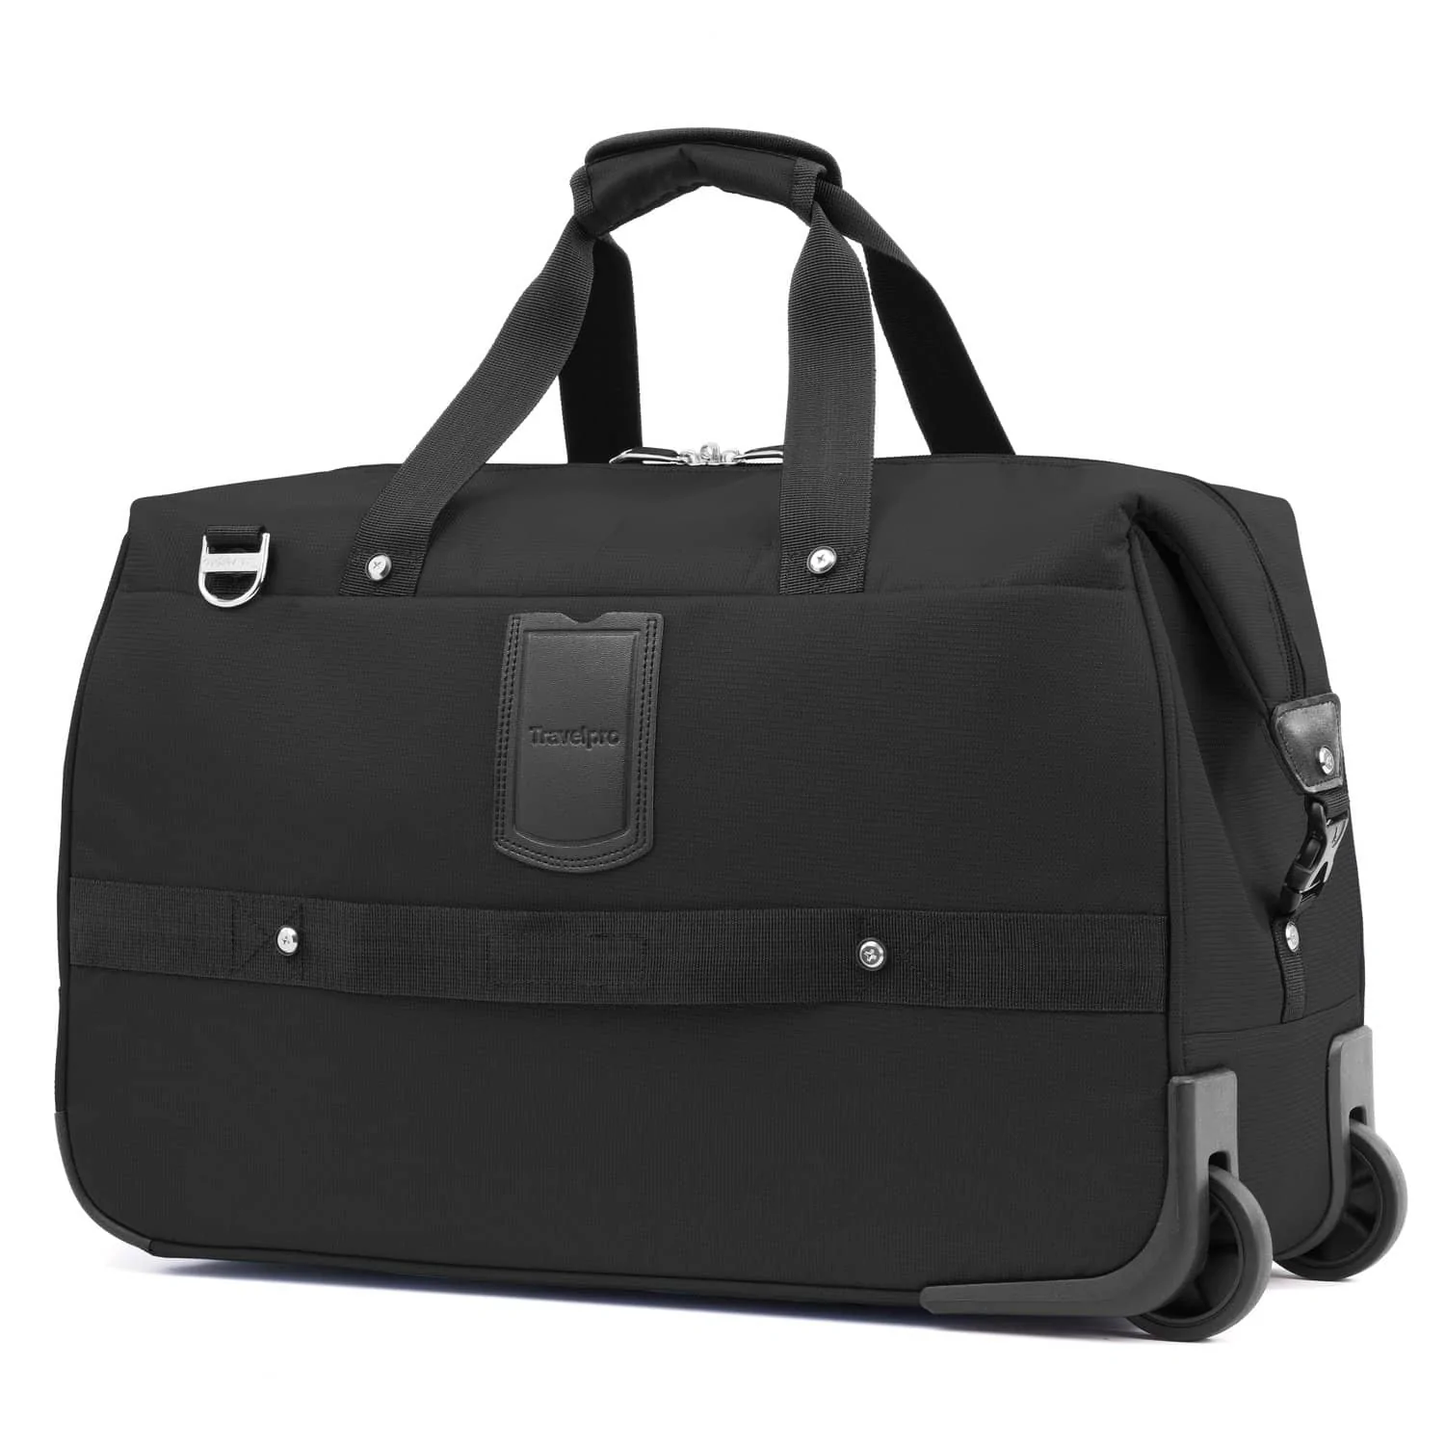 Travelpro Maxlite 5 Rolling Duffel (CARRY-ON)